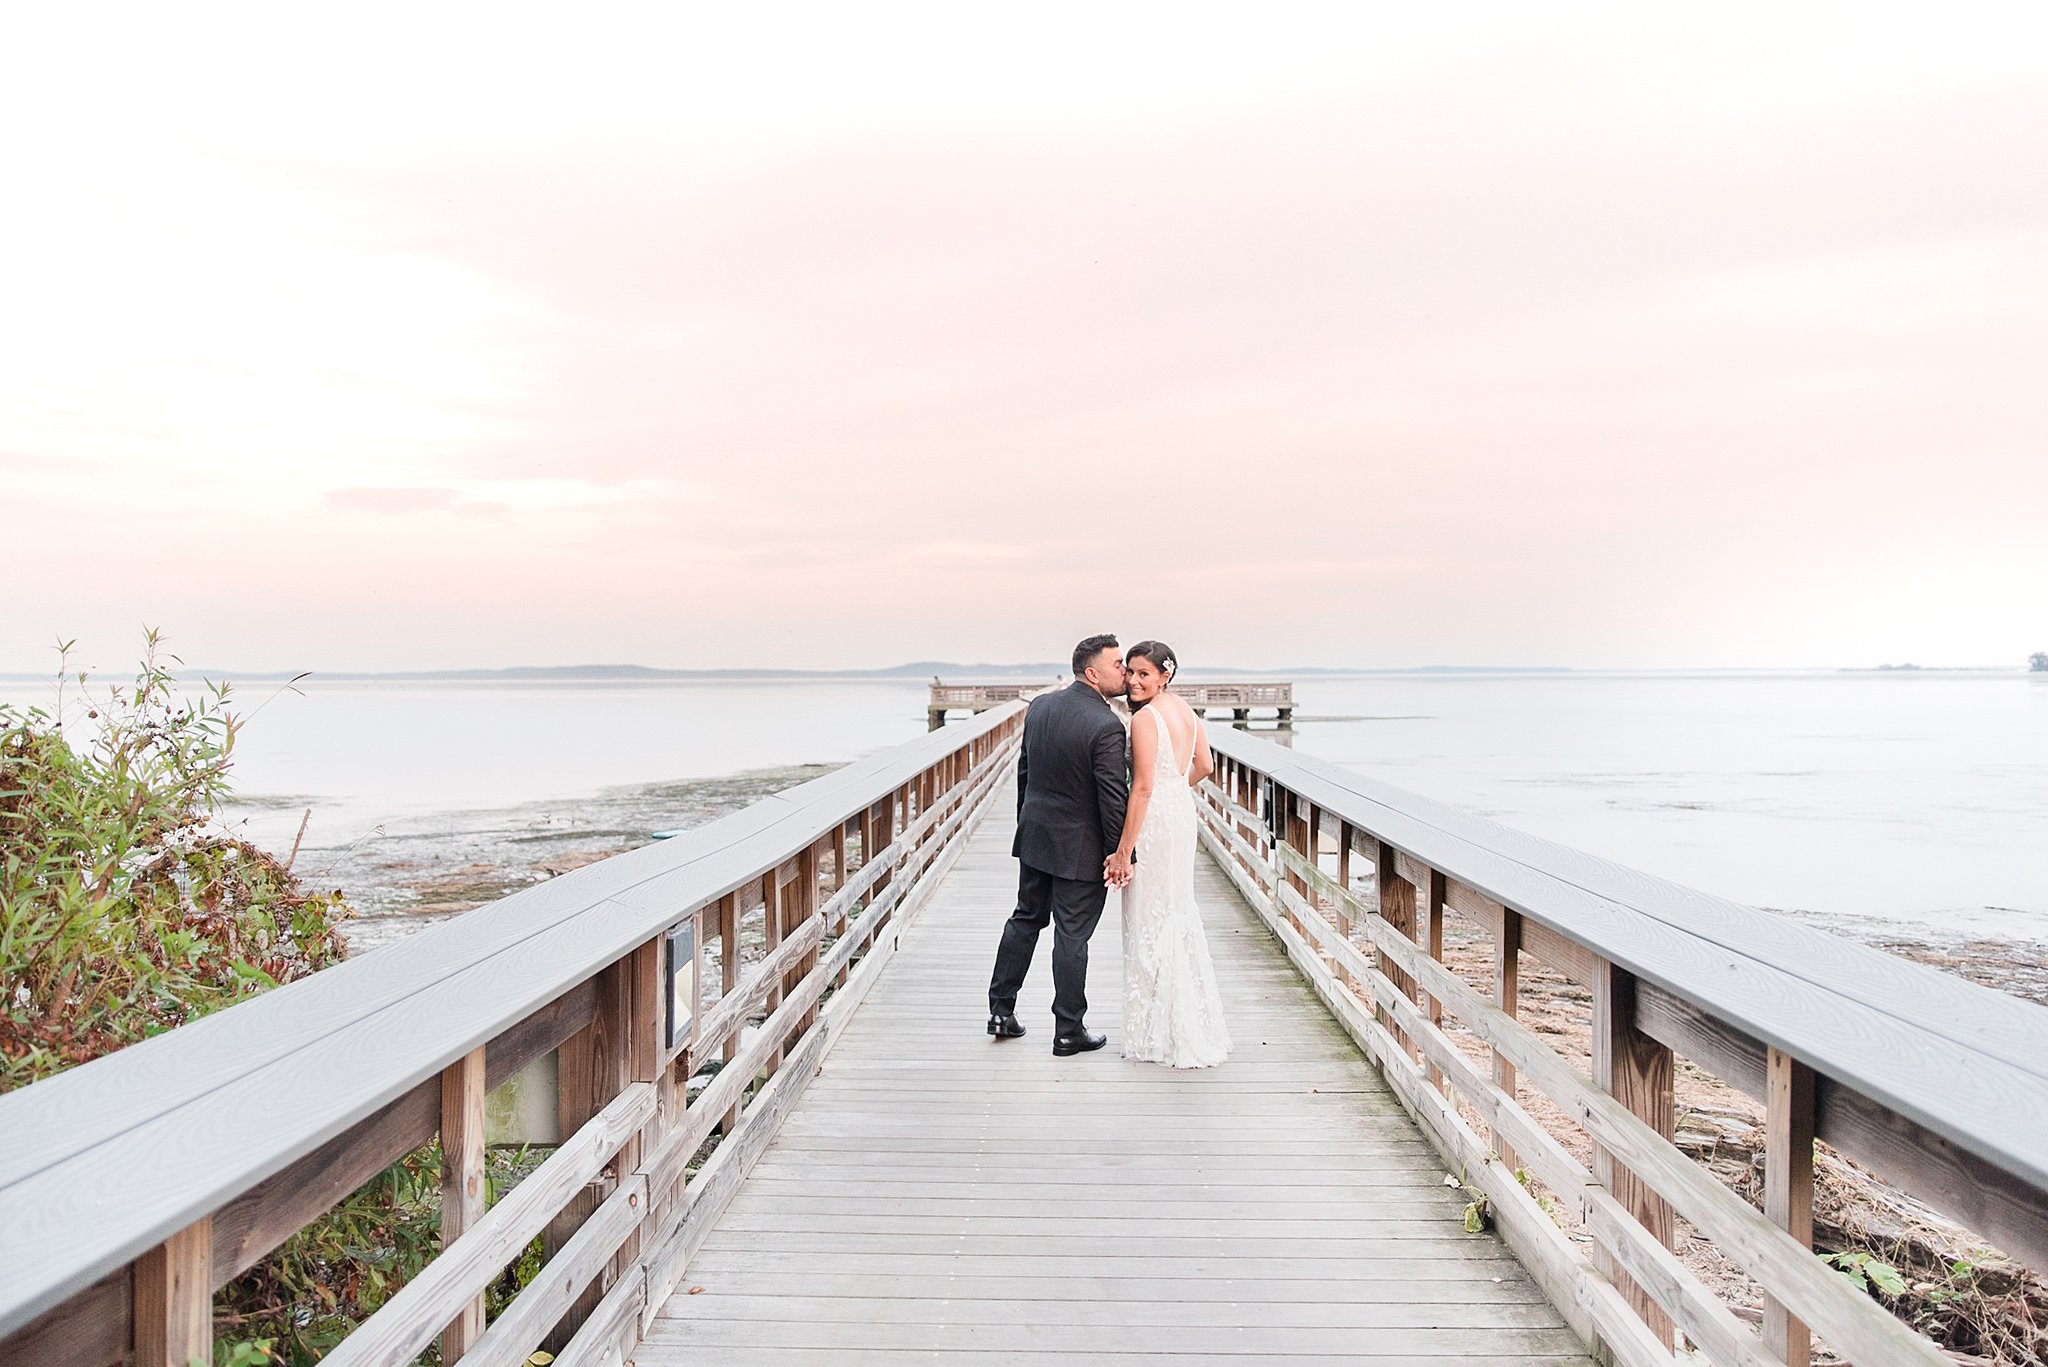 A groom kisses his bride as they walk up a long wooden boardwalk